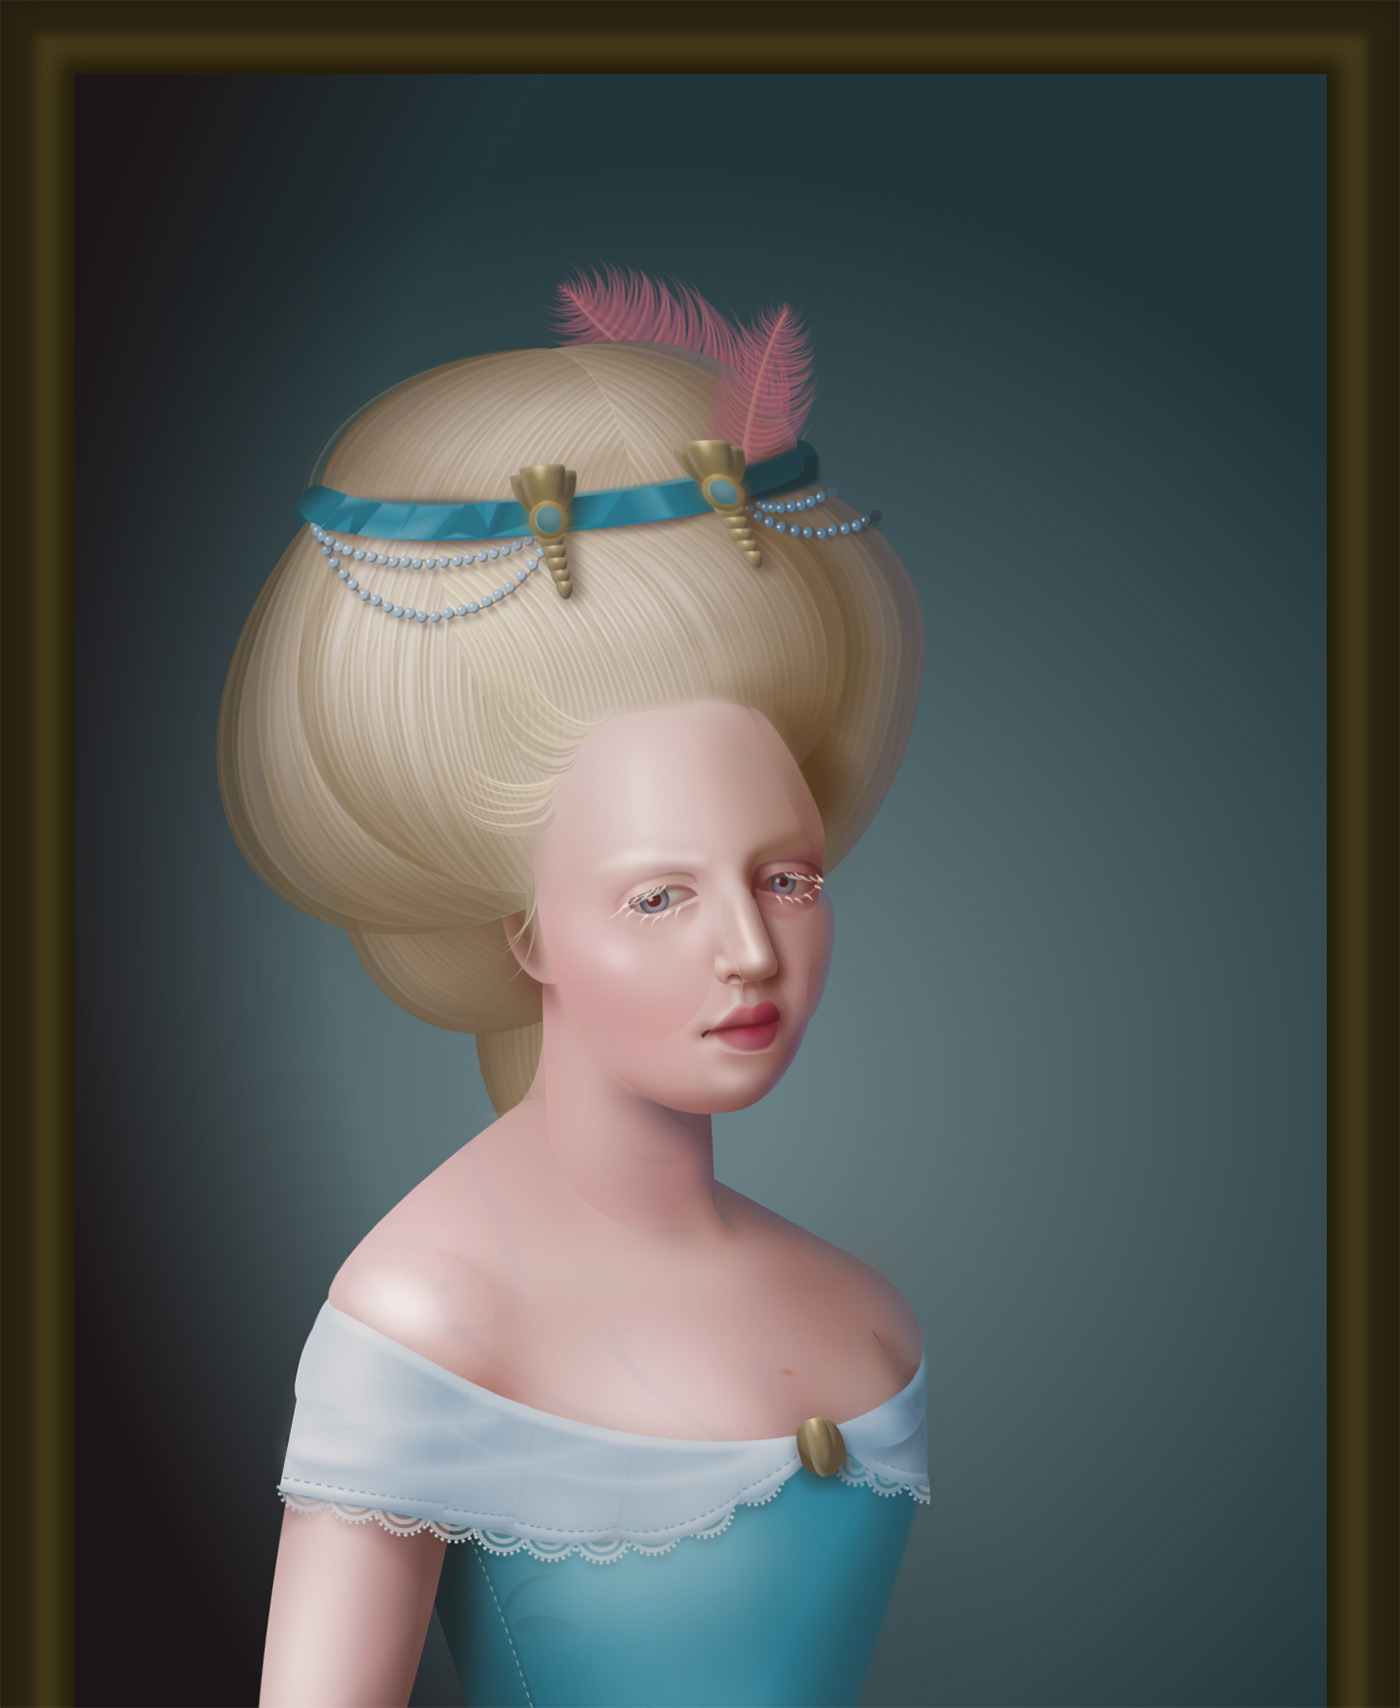 Painting With Code: UI Engineer Diana Smith Creates Baroque-Inspired Portraits with CSS